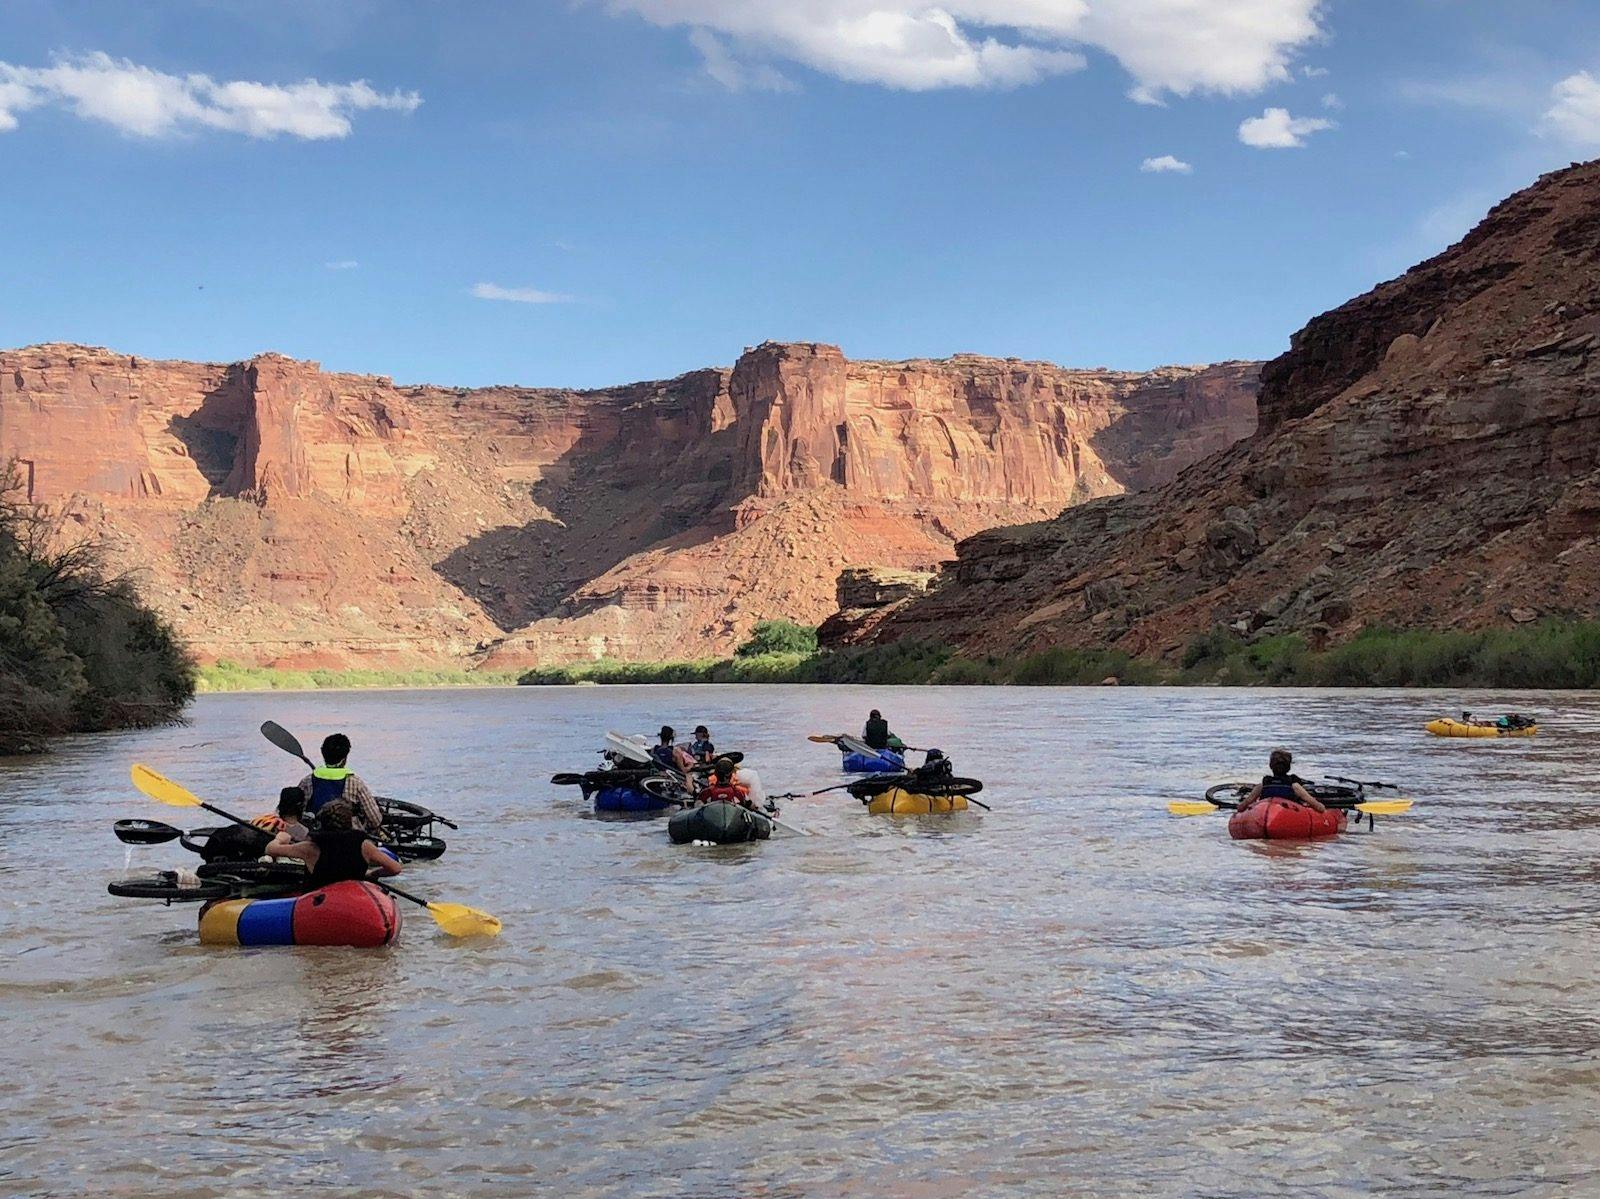 The whole group headed down the Green River.